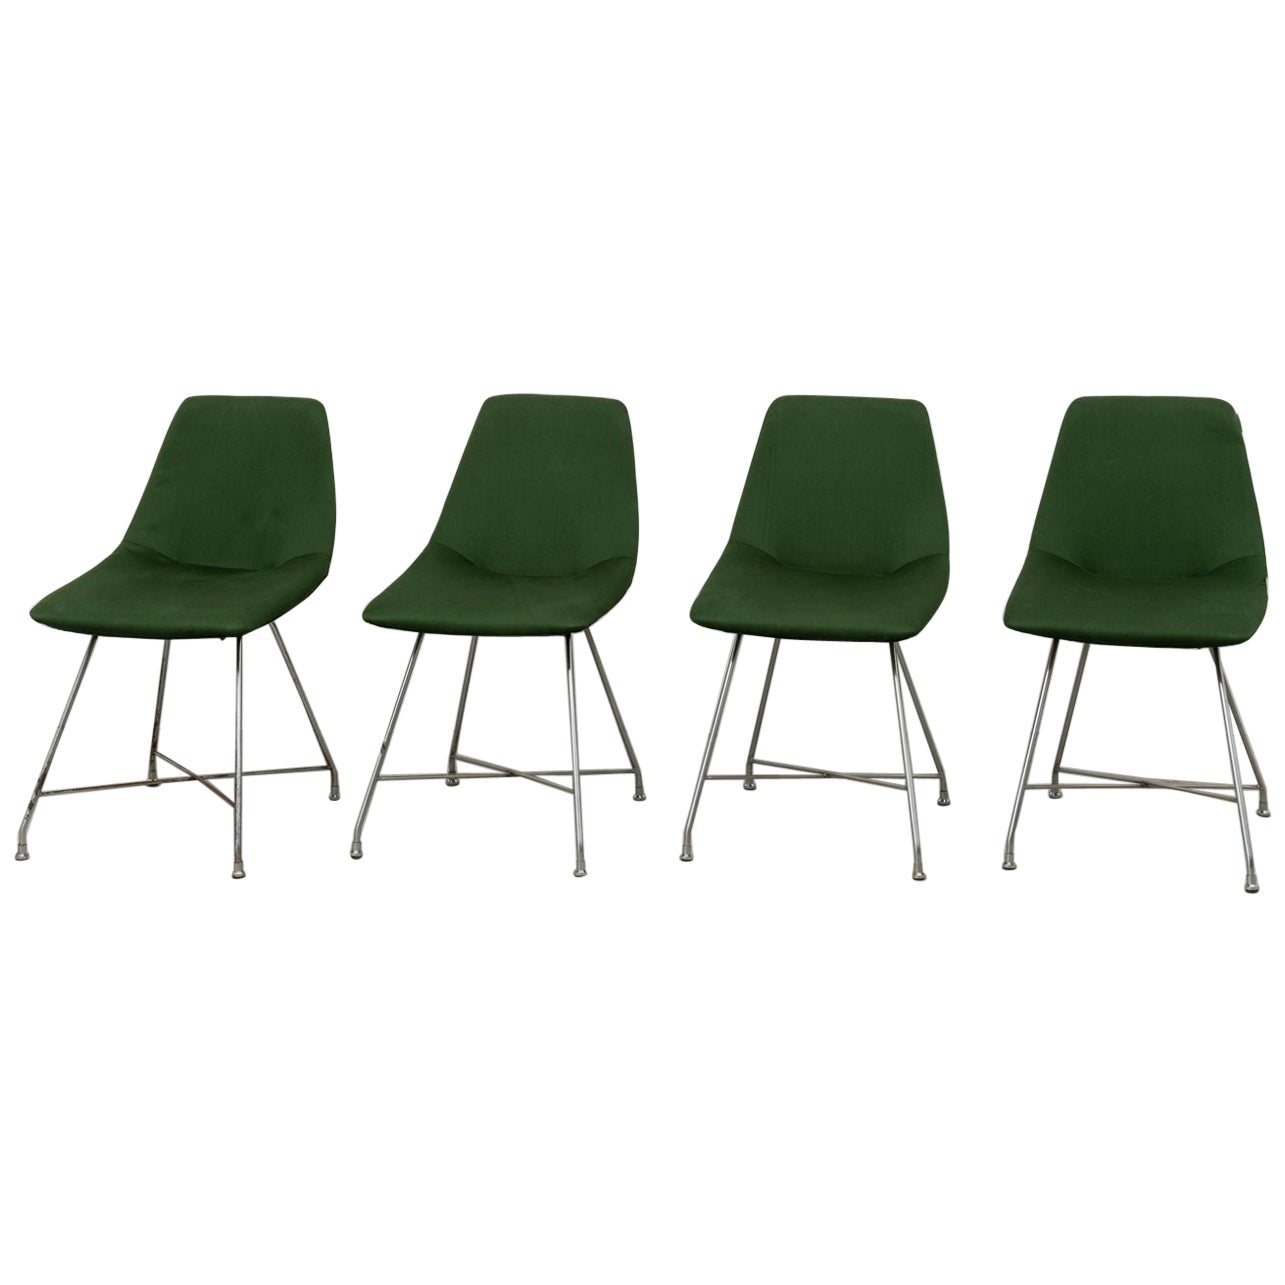 Augusto Bozzi Set of 4 "Aster" Green and Chrome Chairs for Saporiti, 1950s